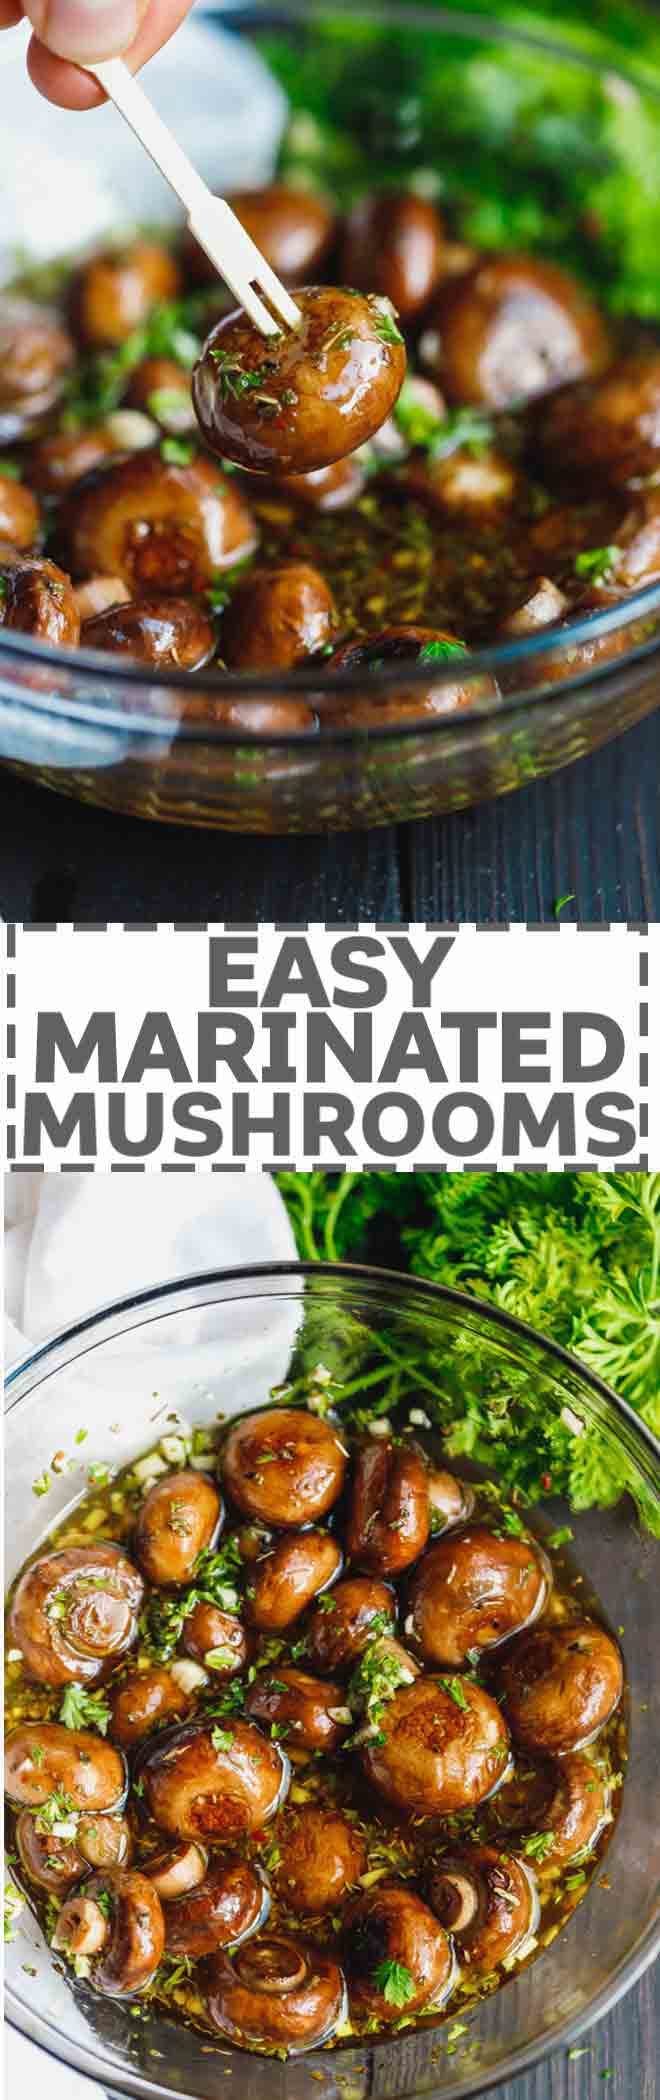 Easy marinaded mushrooms on an appetizer wooden pick